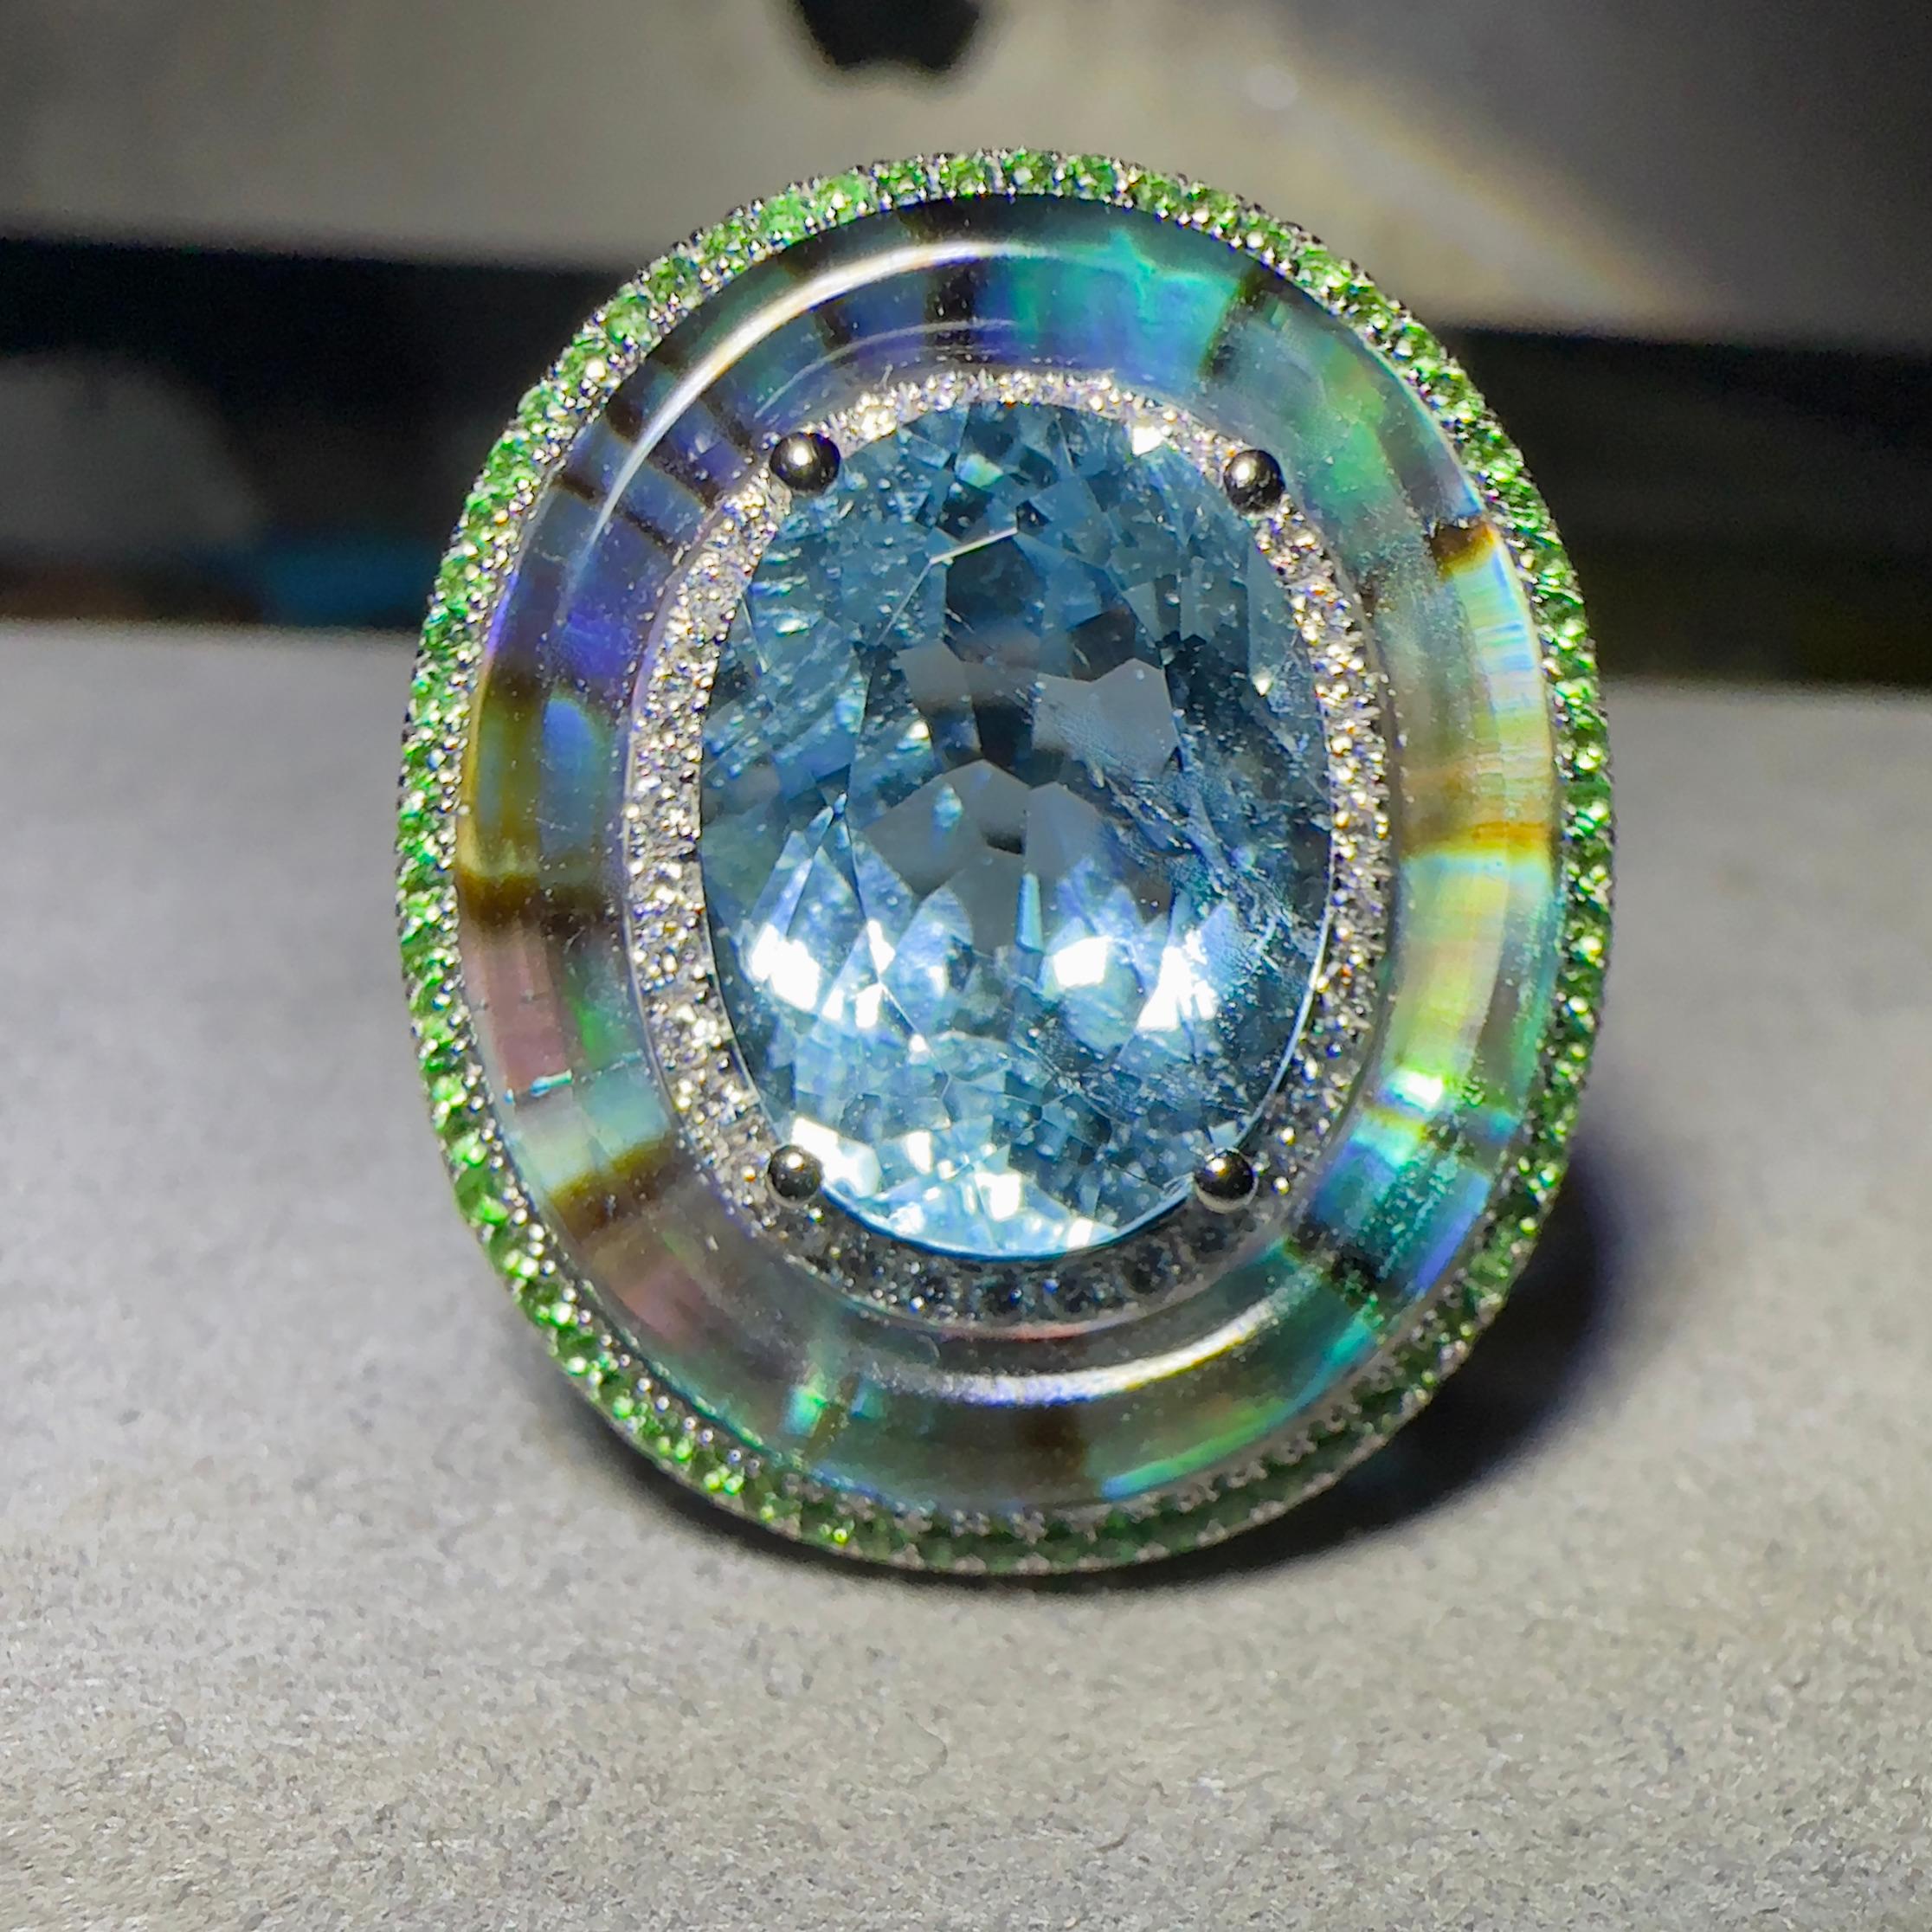 A 4.56 ct aquamarine, Tsavorite, Abalone Shell, Crystal and Diamond in 18k white Gold. The aquamarine is surrounded by a circle of diamond pave, on the outer circle is where the abalone shell is. The abalone shell is cover by thick crystal  giving